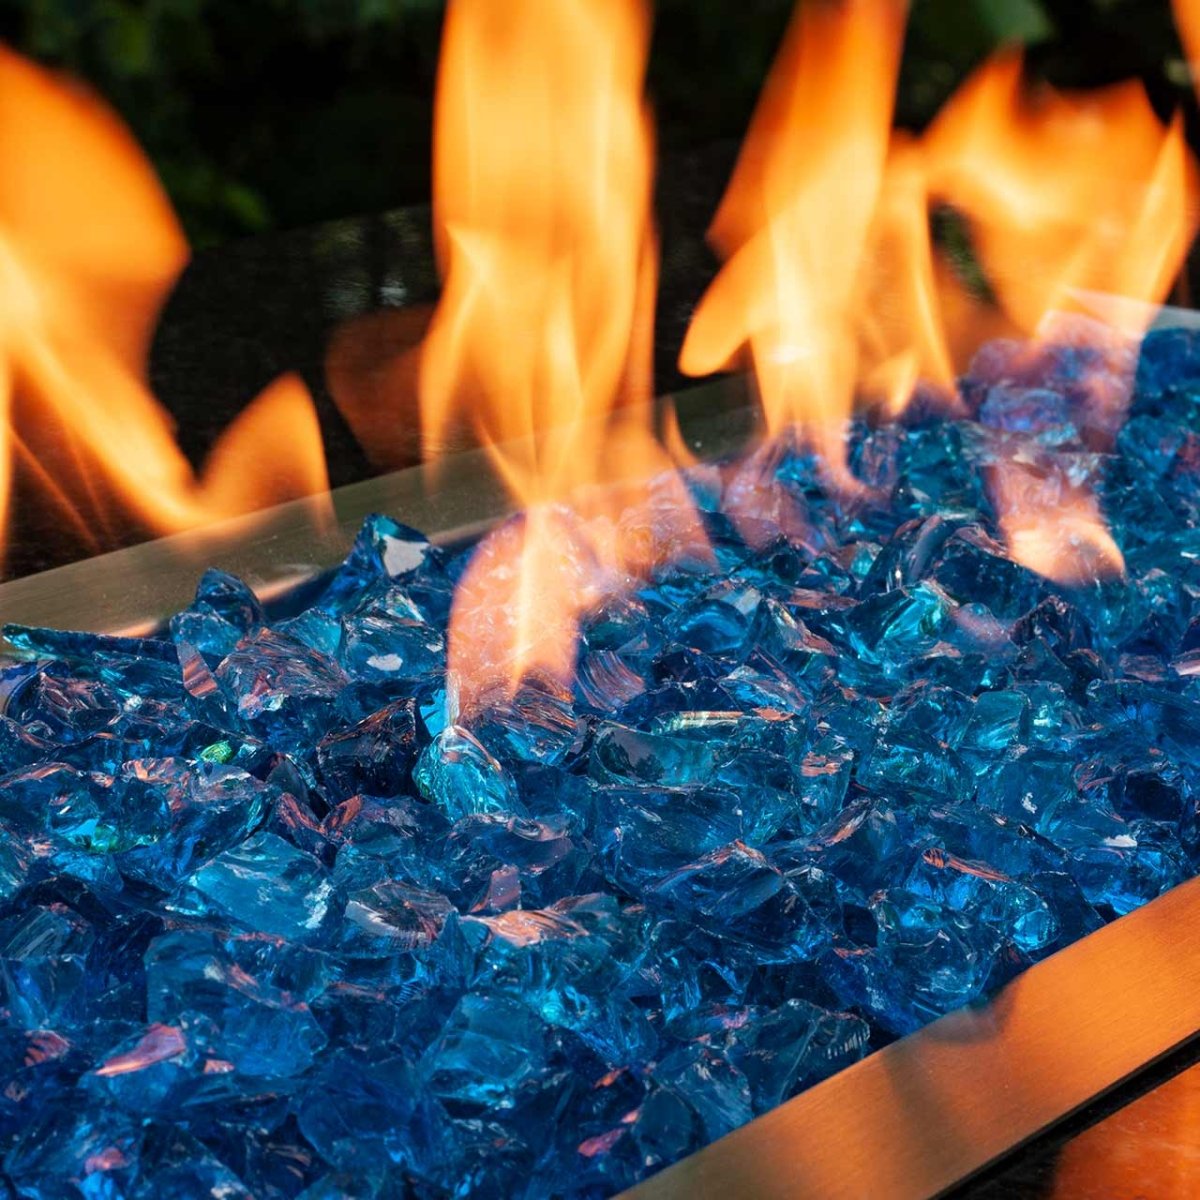 Crystal Green Fire Glass - American Specialty Glass